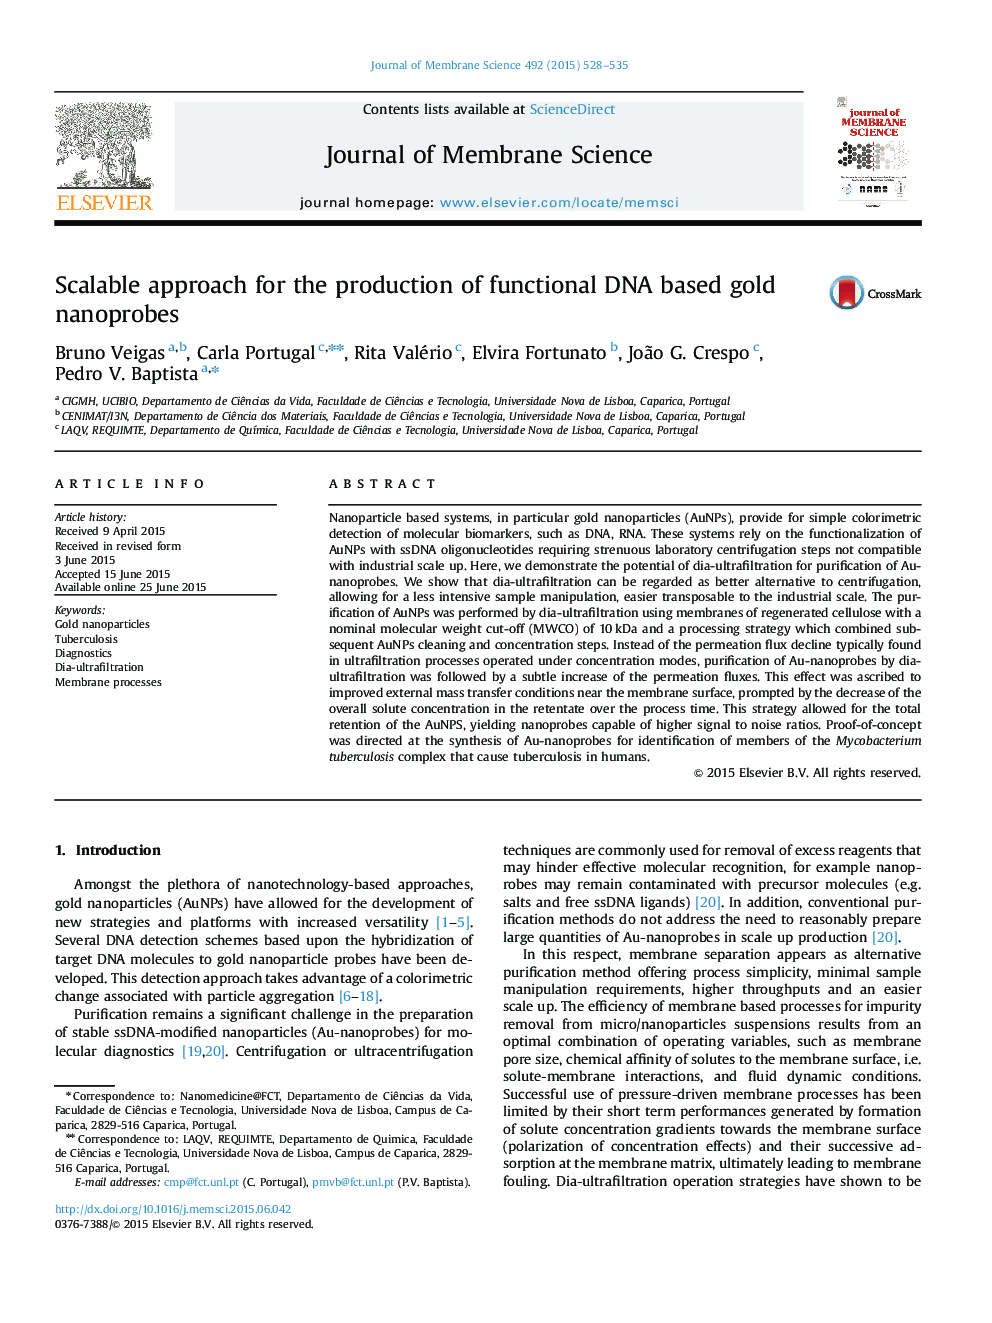 Scalable approach for the production of functional DNA based gold nanoprobes